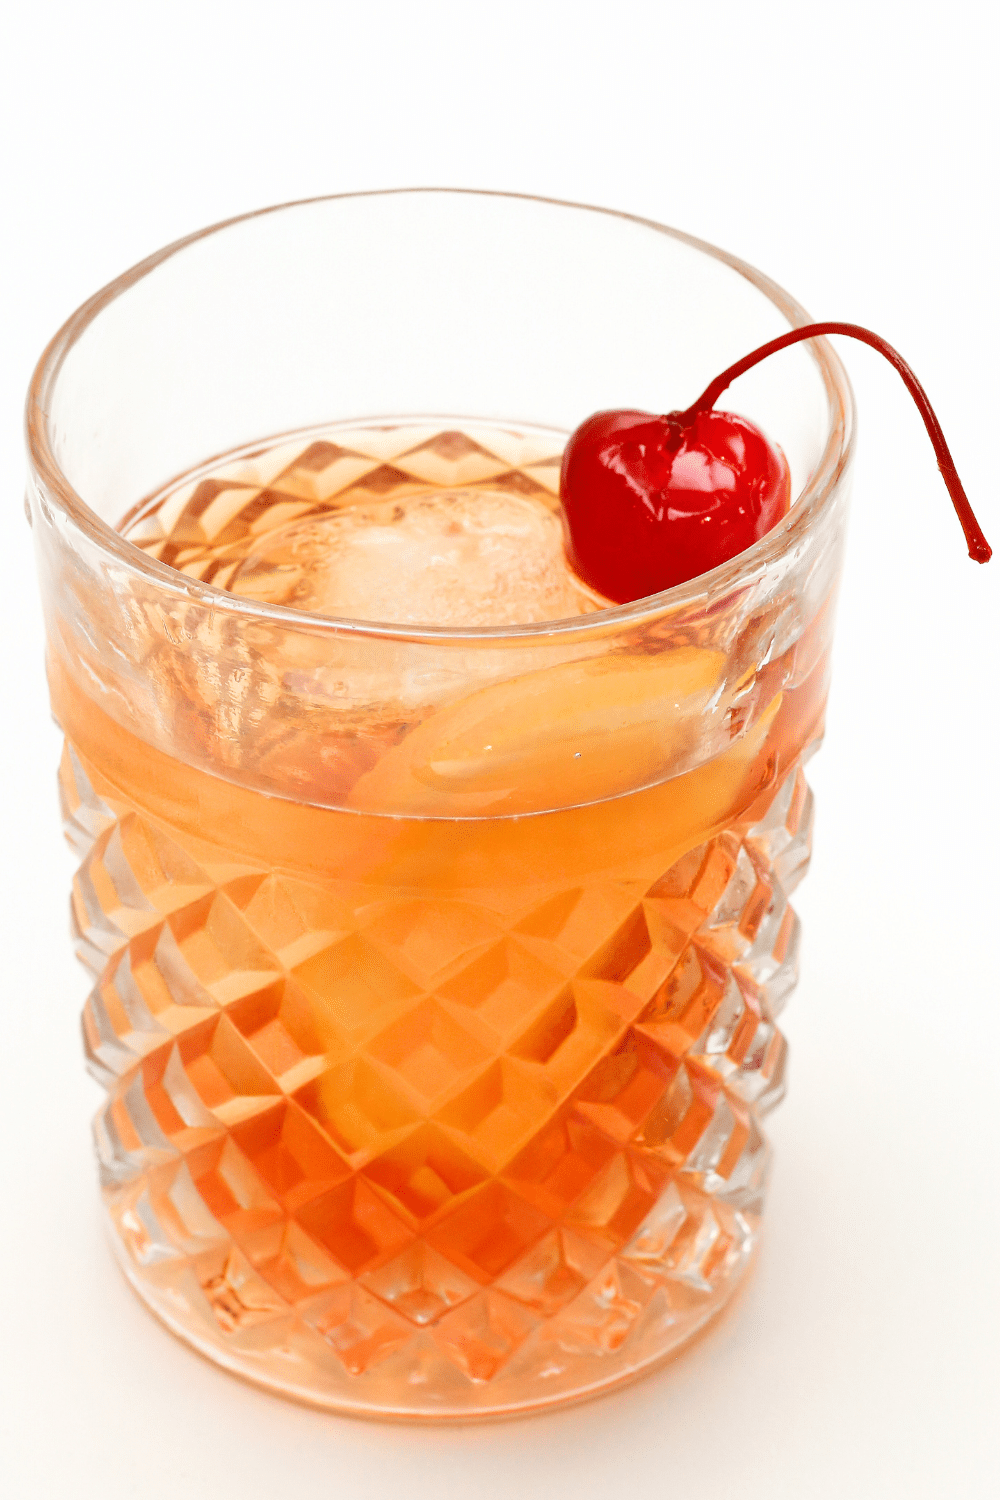 Timeless Old Fashioned cocktail on the rocks, crafted with bourbon or whiskey, muddled sugar, and aromatic bitters.